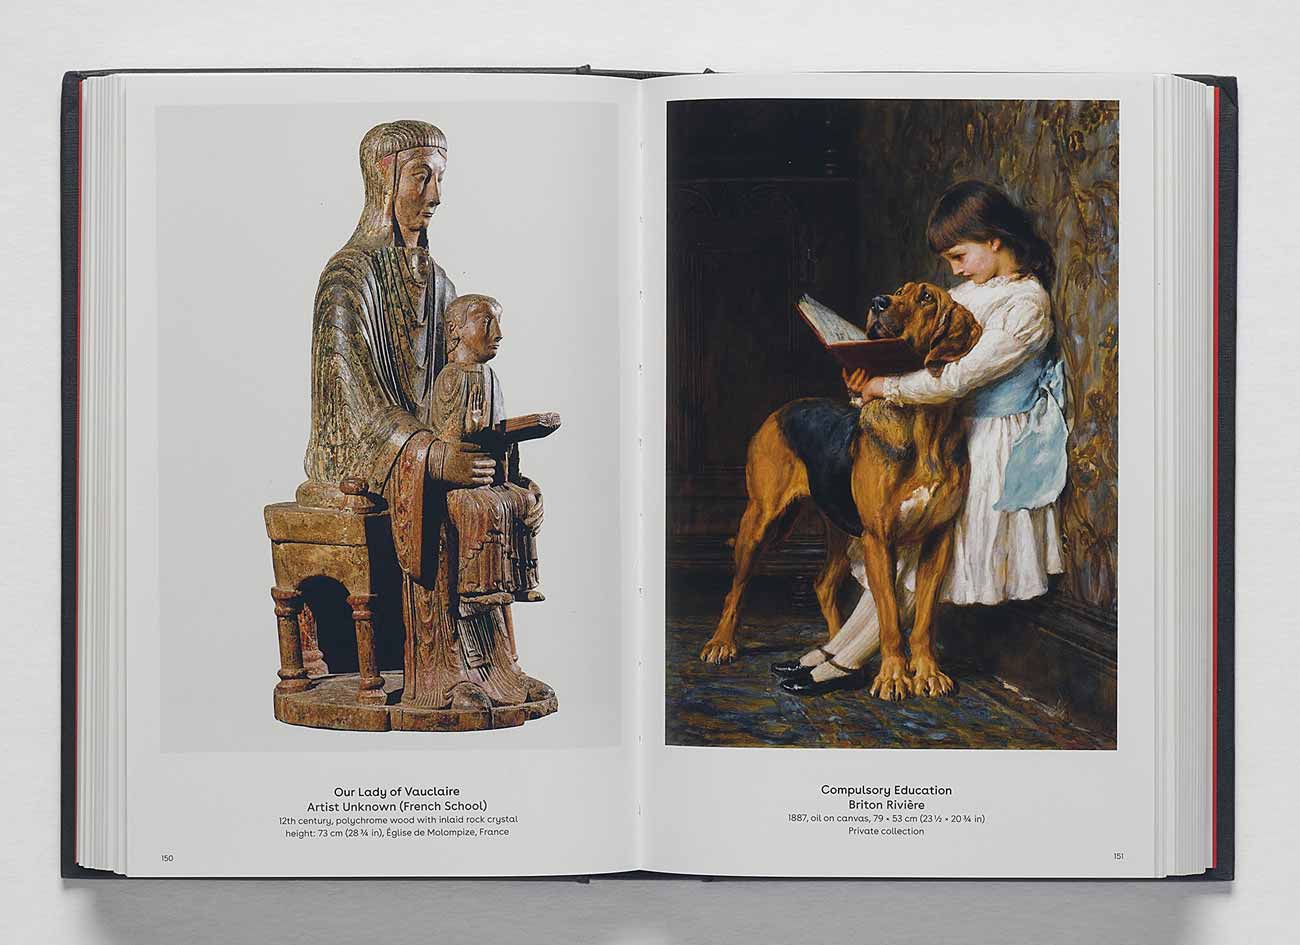 Book spread with a sculpture of a mother and child at left and a painting of a girl reading a book to a dog at right